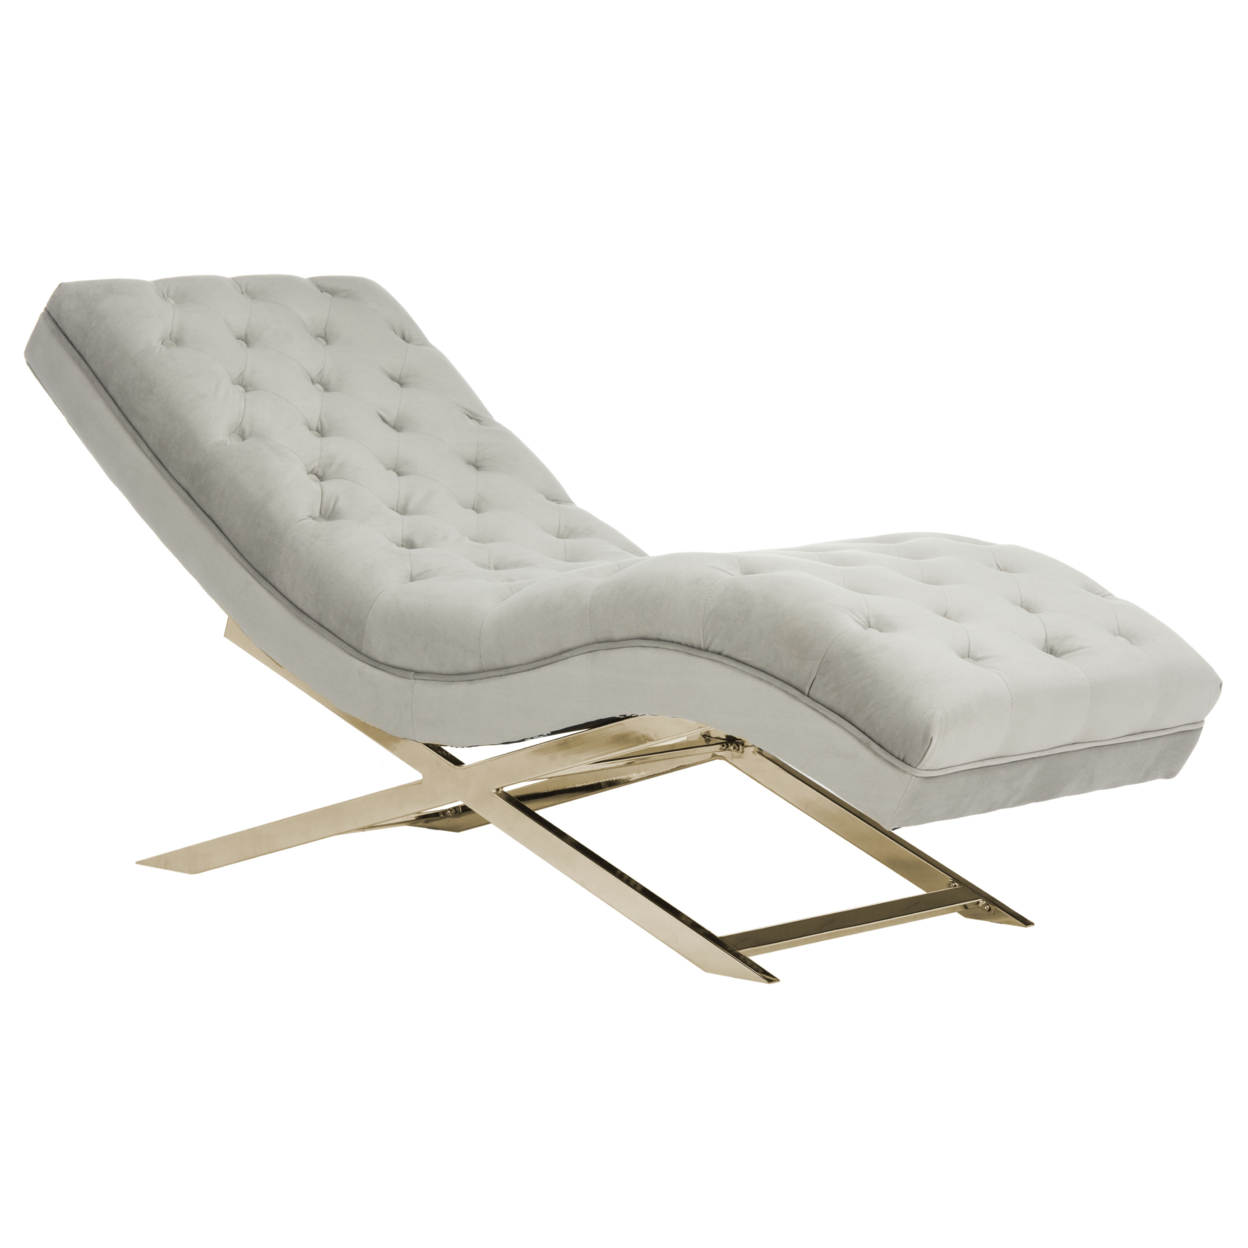 SAFAVIEH Monroe Chaise With Headrest Pillow Grey / Gold